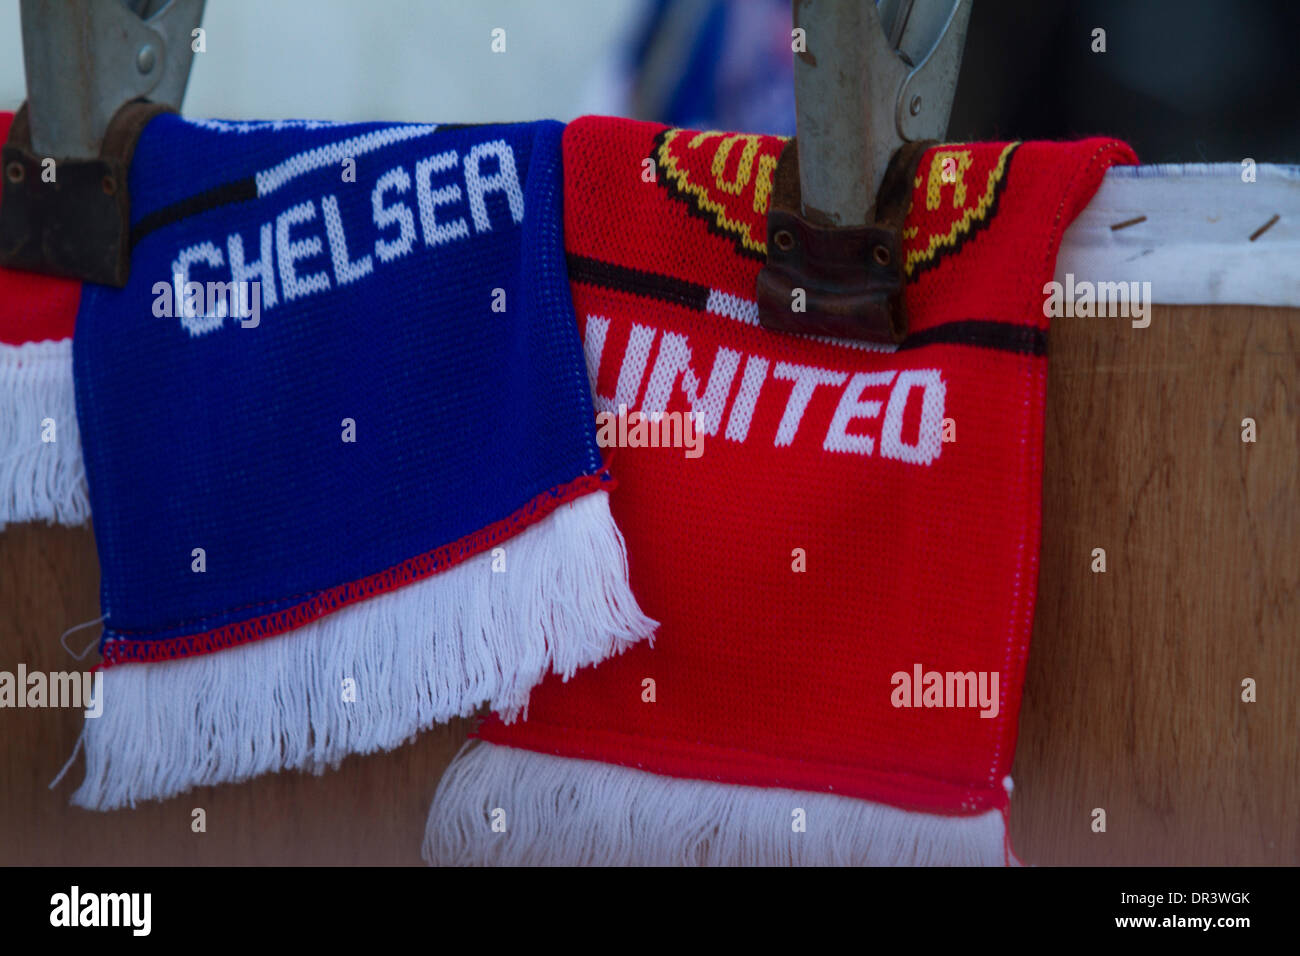 London UK. 19th January 2014. Football scarves on sale as fans gather ahead of the English premier league match between Chelsea and Manchester United at Stamford Bridge Credit:  amer ghazzal/Alamy Live News Stock Photo